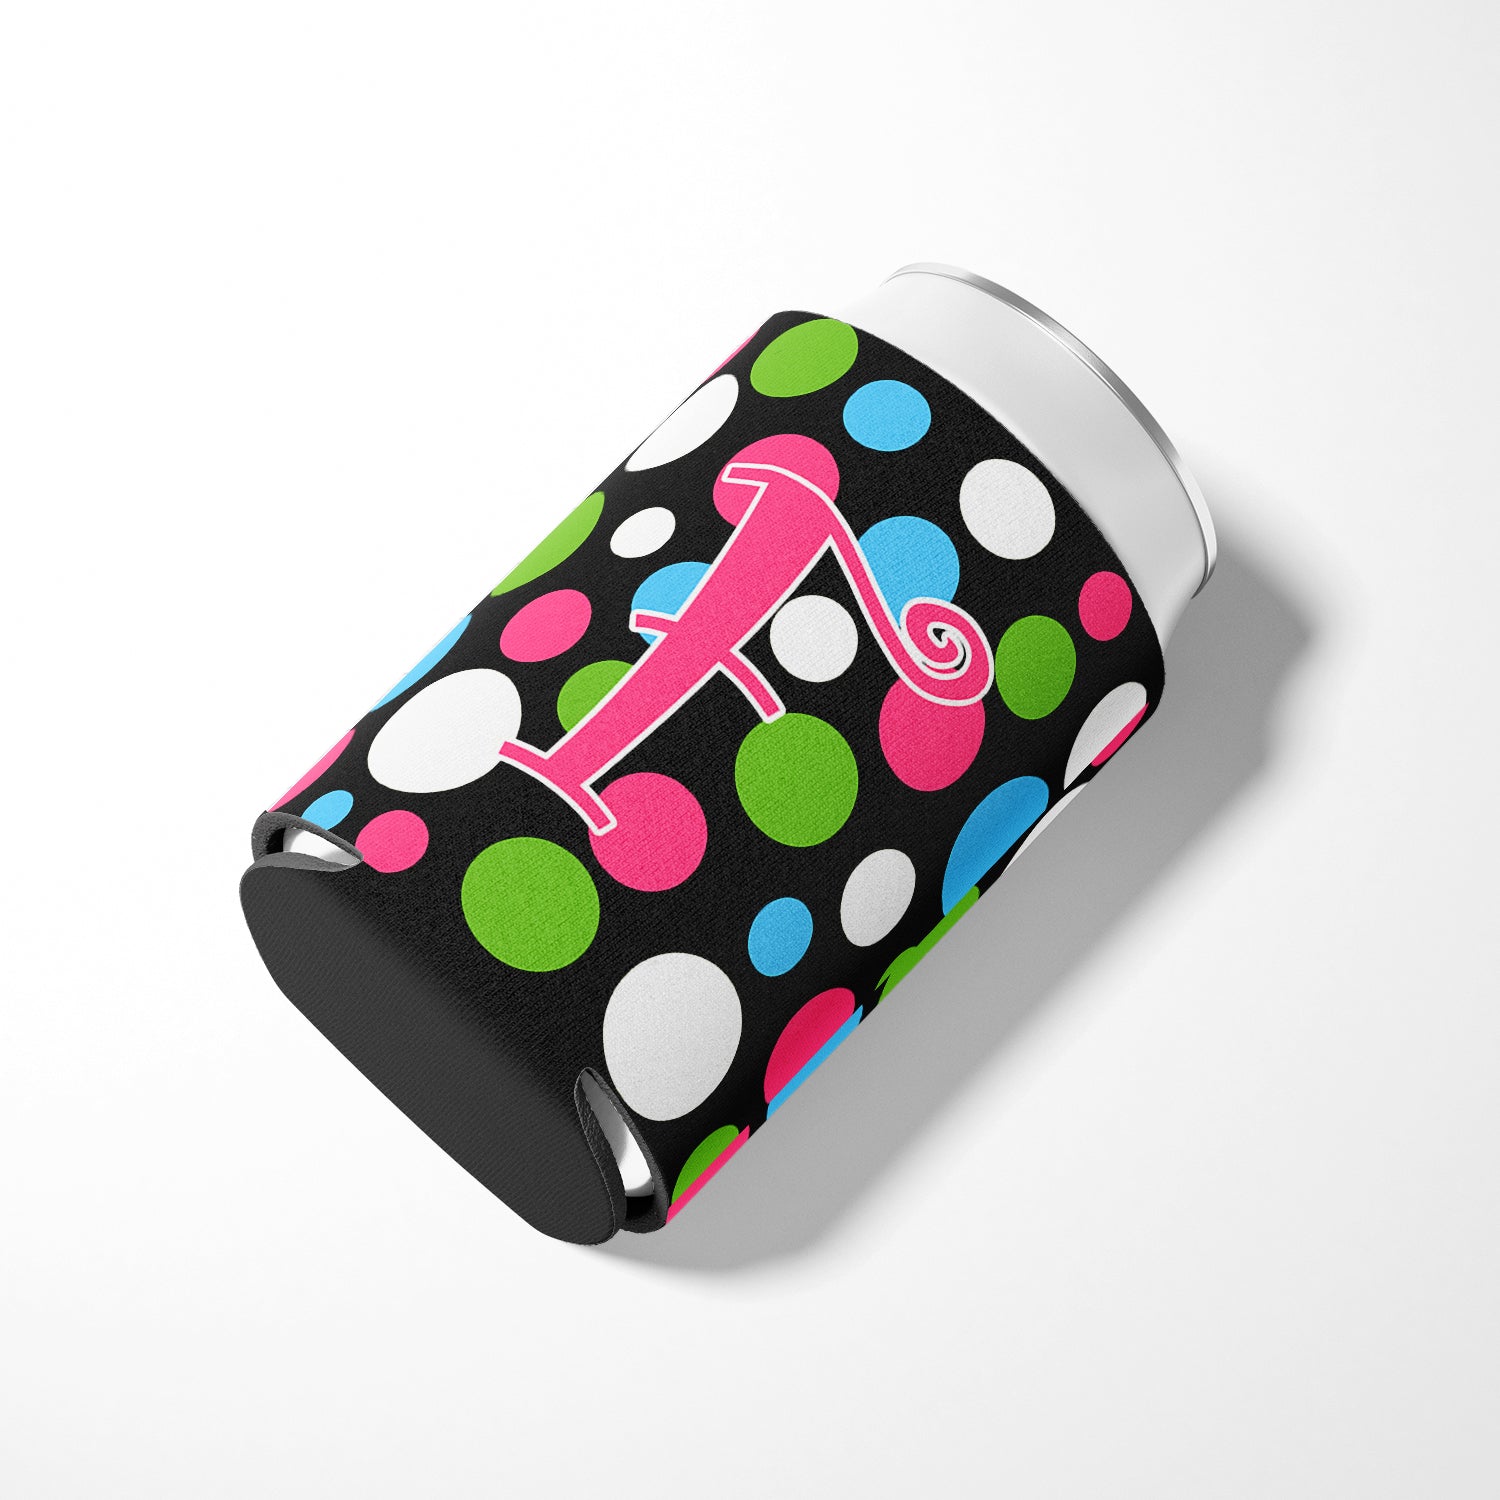 Letter F Initial Monogram - Polkadots and Pink Can or Bottle Beverage Insulator Hugger.